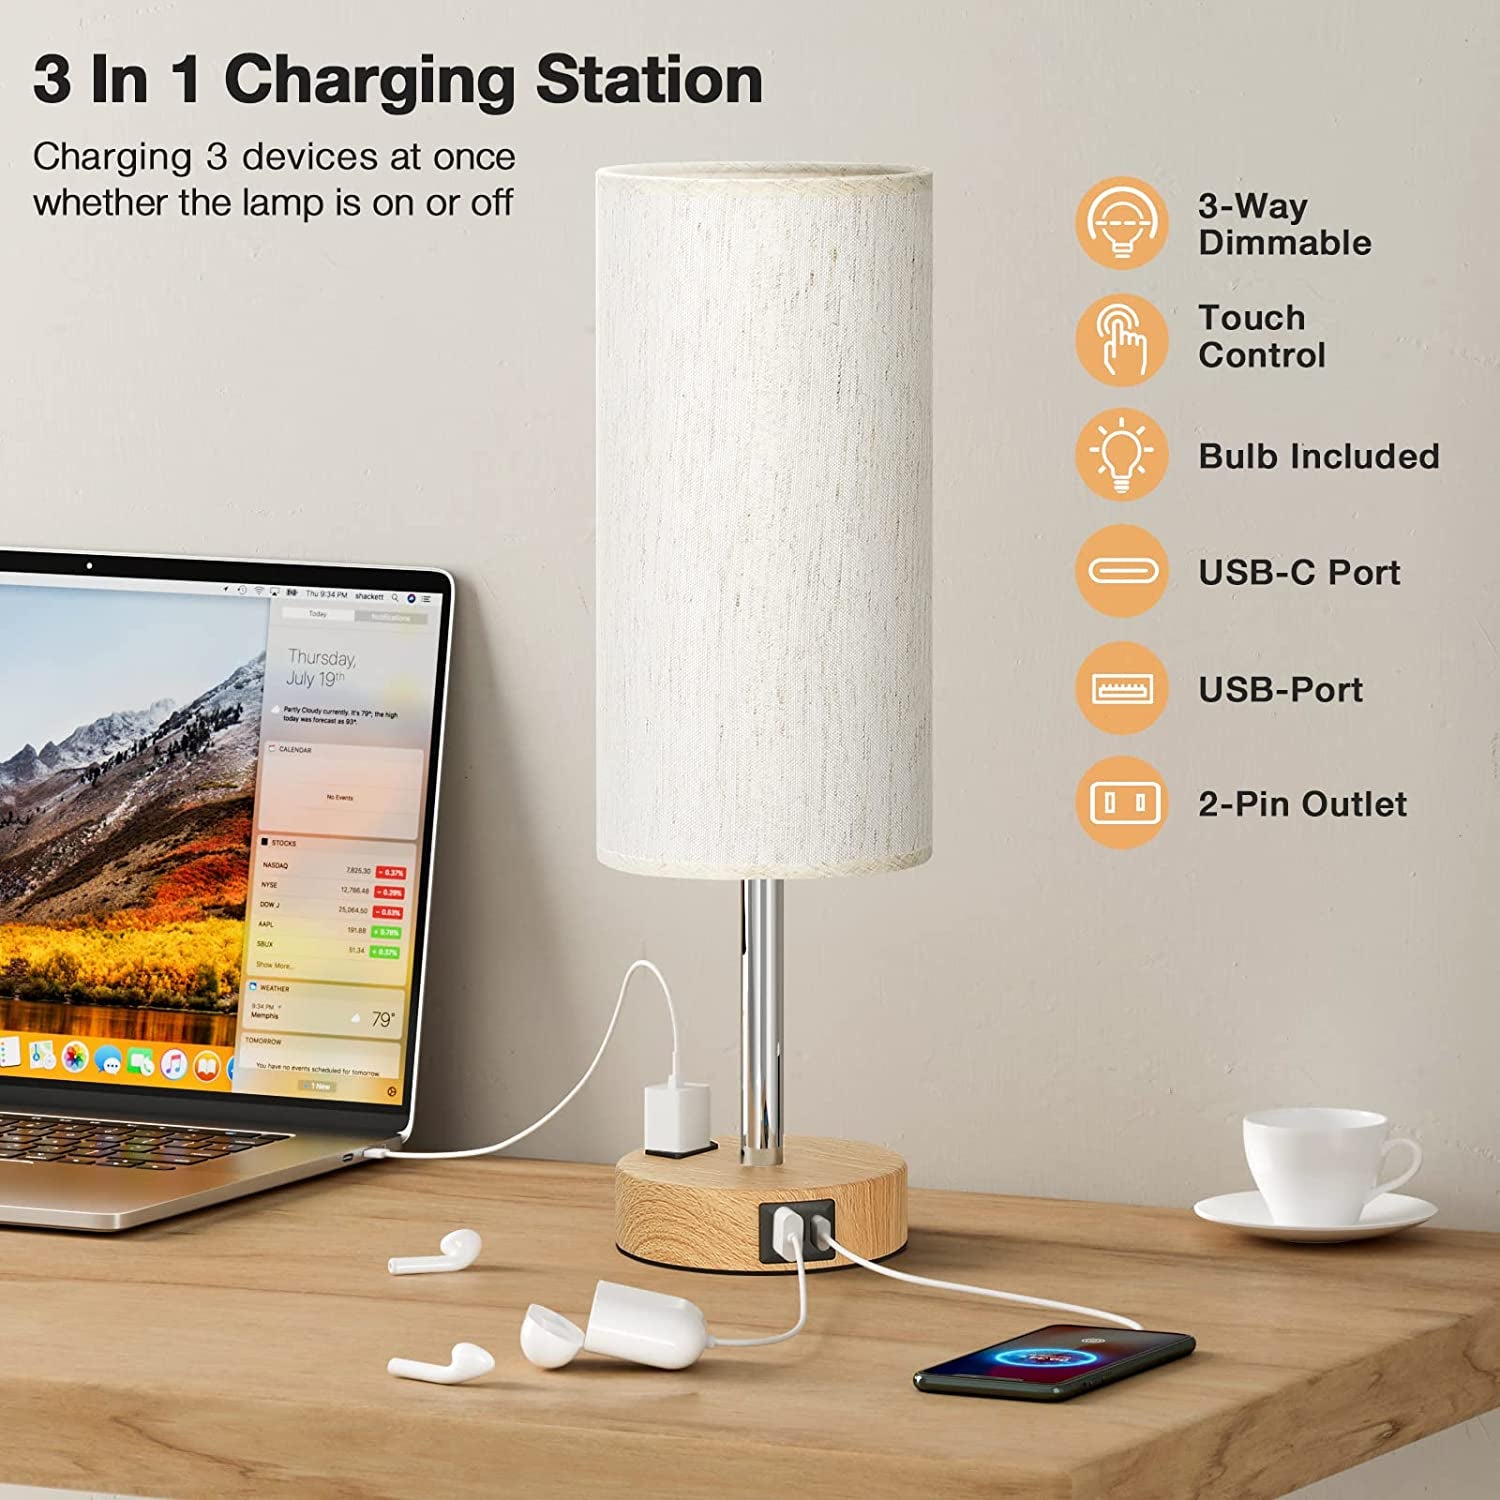 Beside Table Lamp for Bedroom Nightstand - 3 Way Dimmable Touch Lamp USB C Charging Ports and AC Outlet, Small Lamp Wood Base round Flaxen Fabric Shade for Living Room, Office Desk, LED Bulb Included